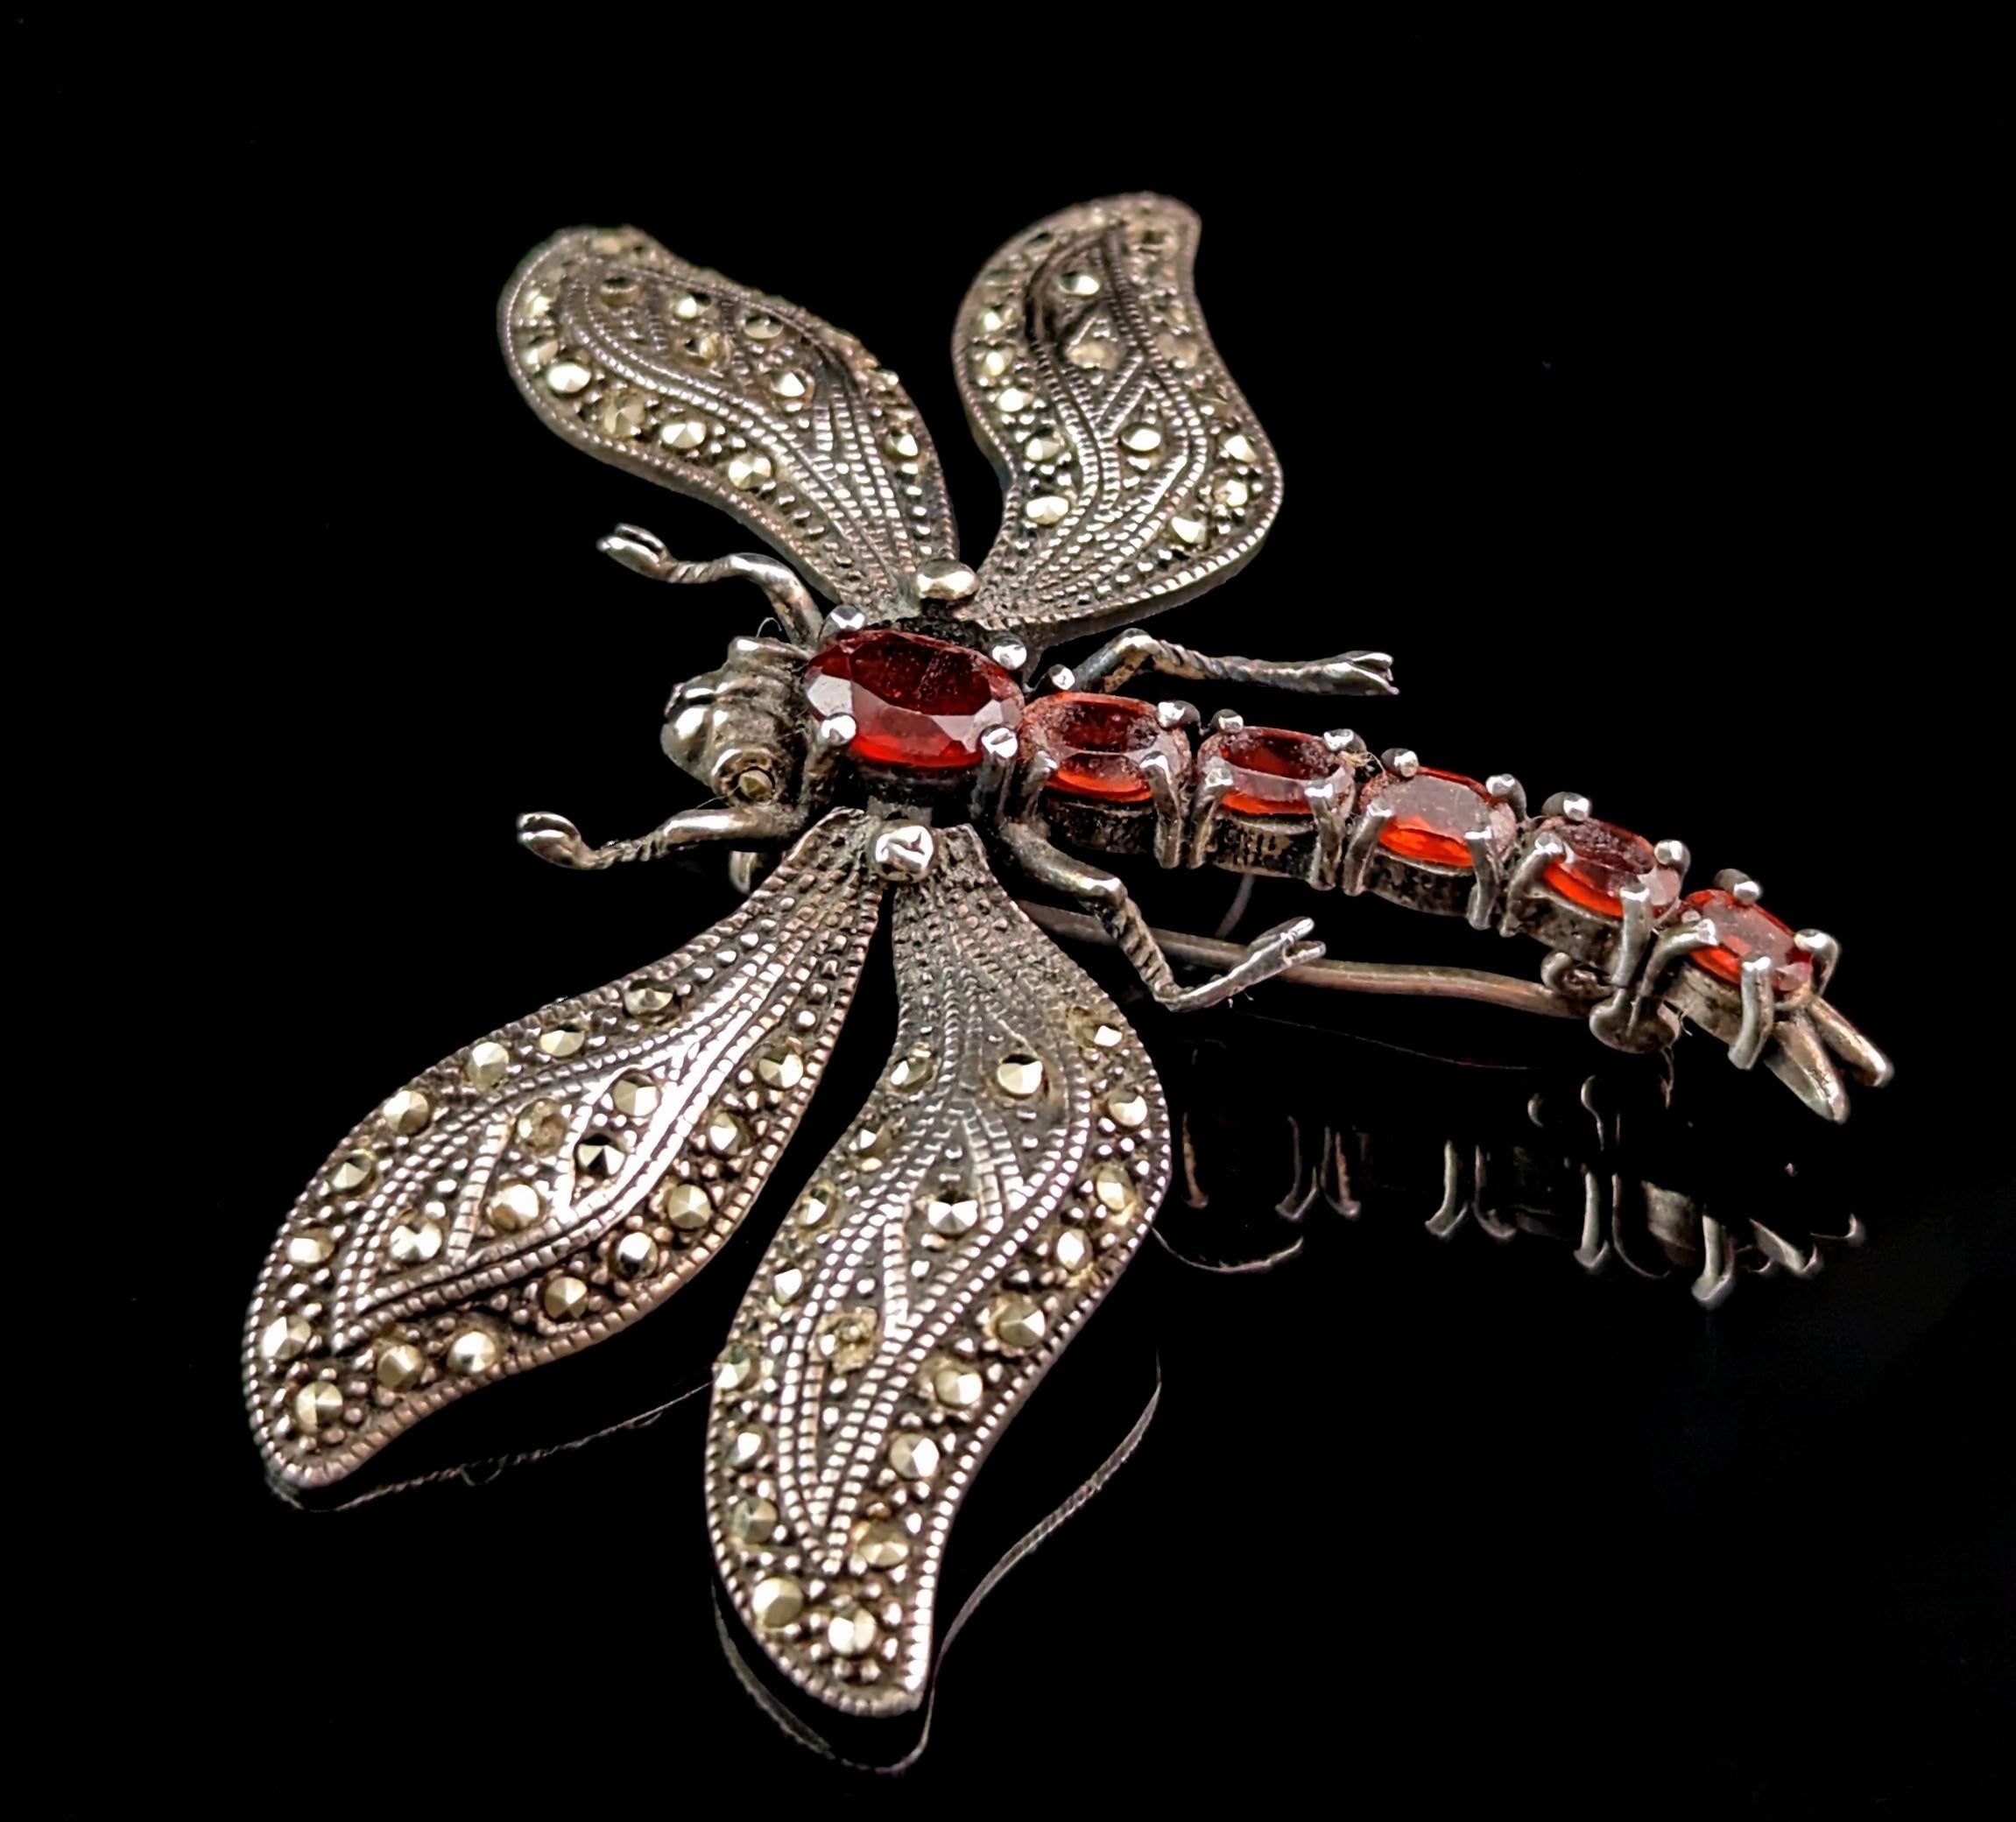 This vintage sterling silver Dragonfly brooch is a truly striking piece.

It is a large sized brooch that could be worn in many ways and the wings are lightly articulated so have some movement.

The wings are adorned all over with marcasite and the